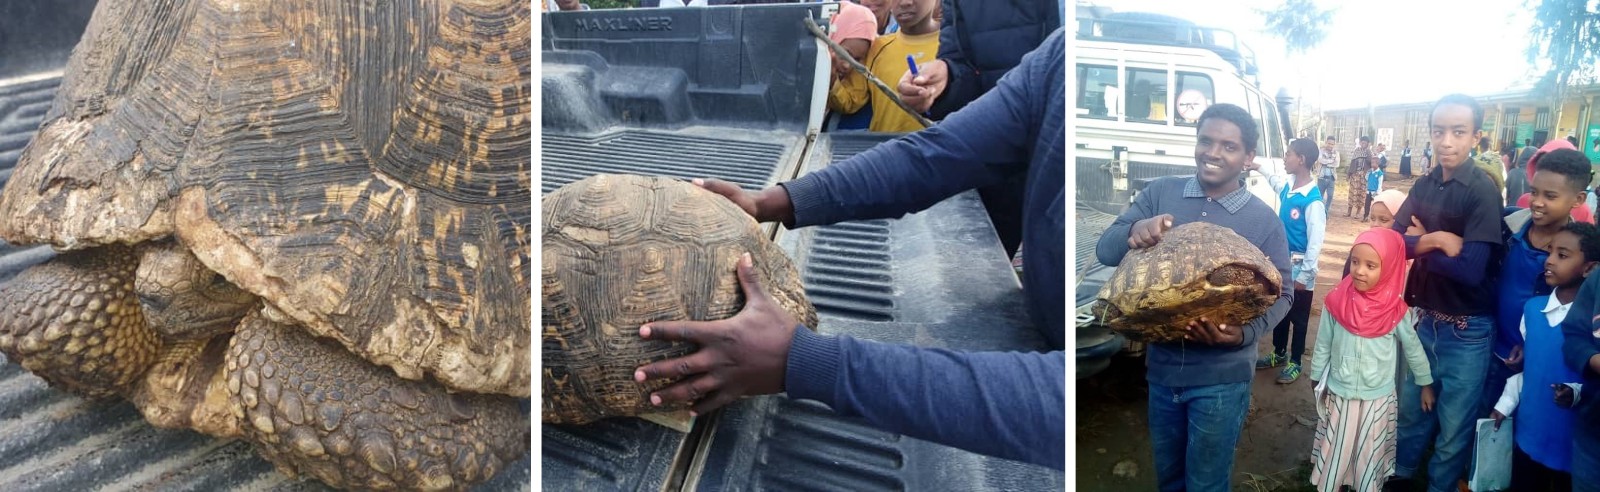 Photos of the rescued tortoise and the students who found her